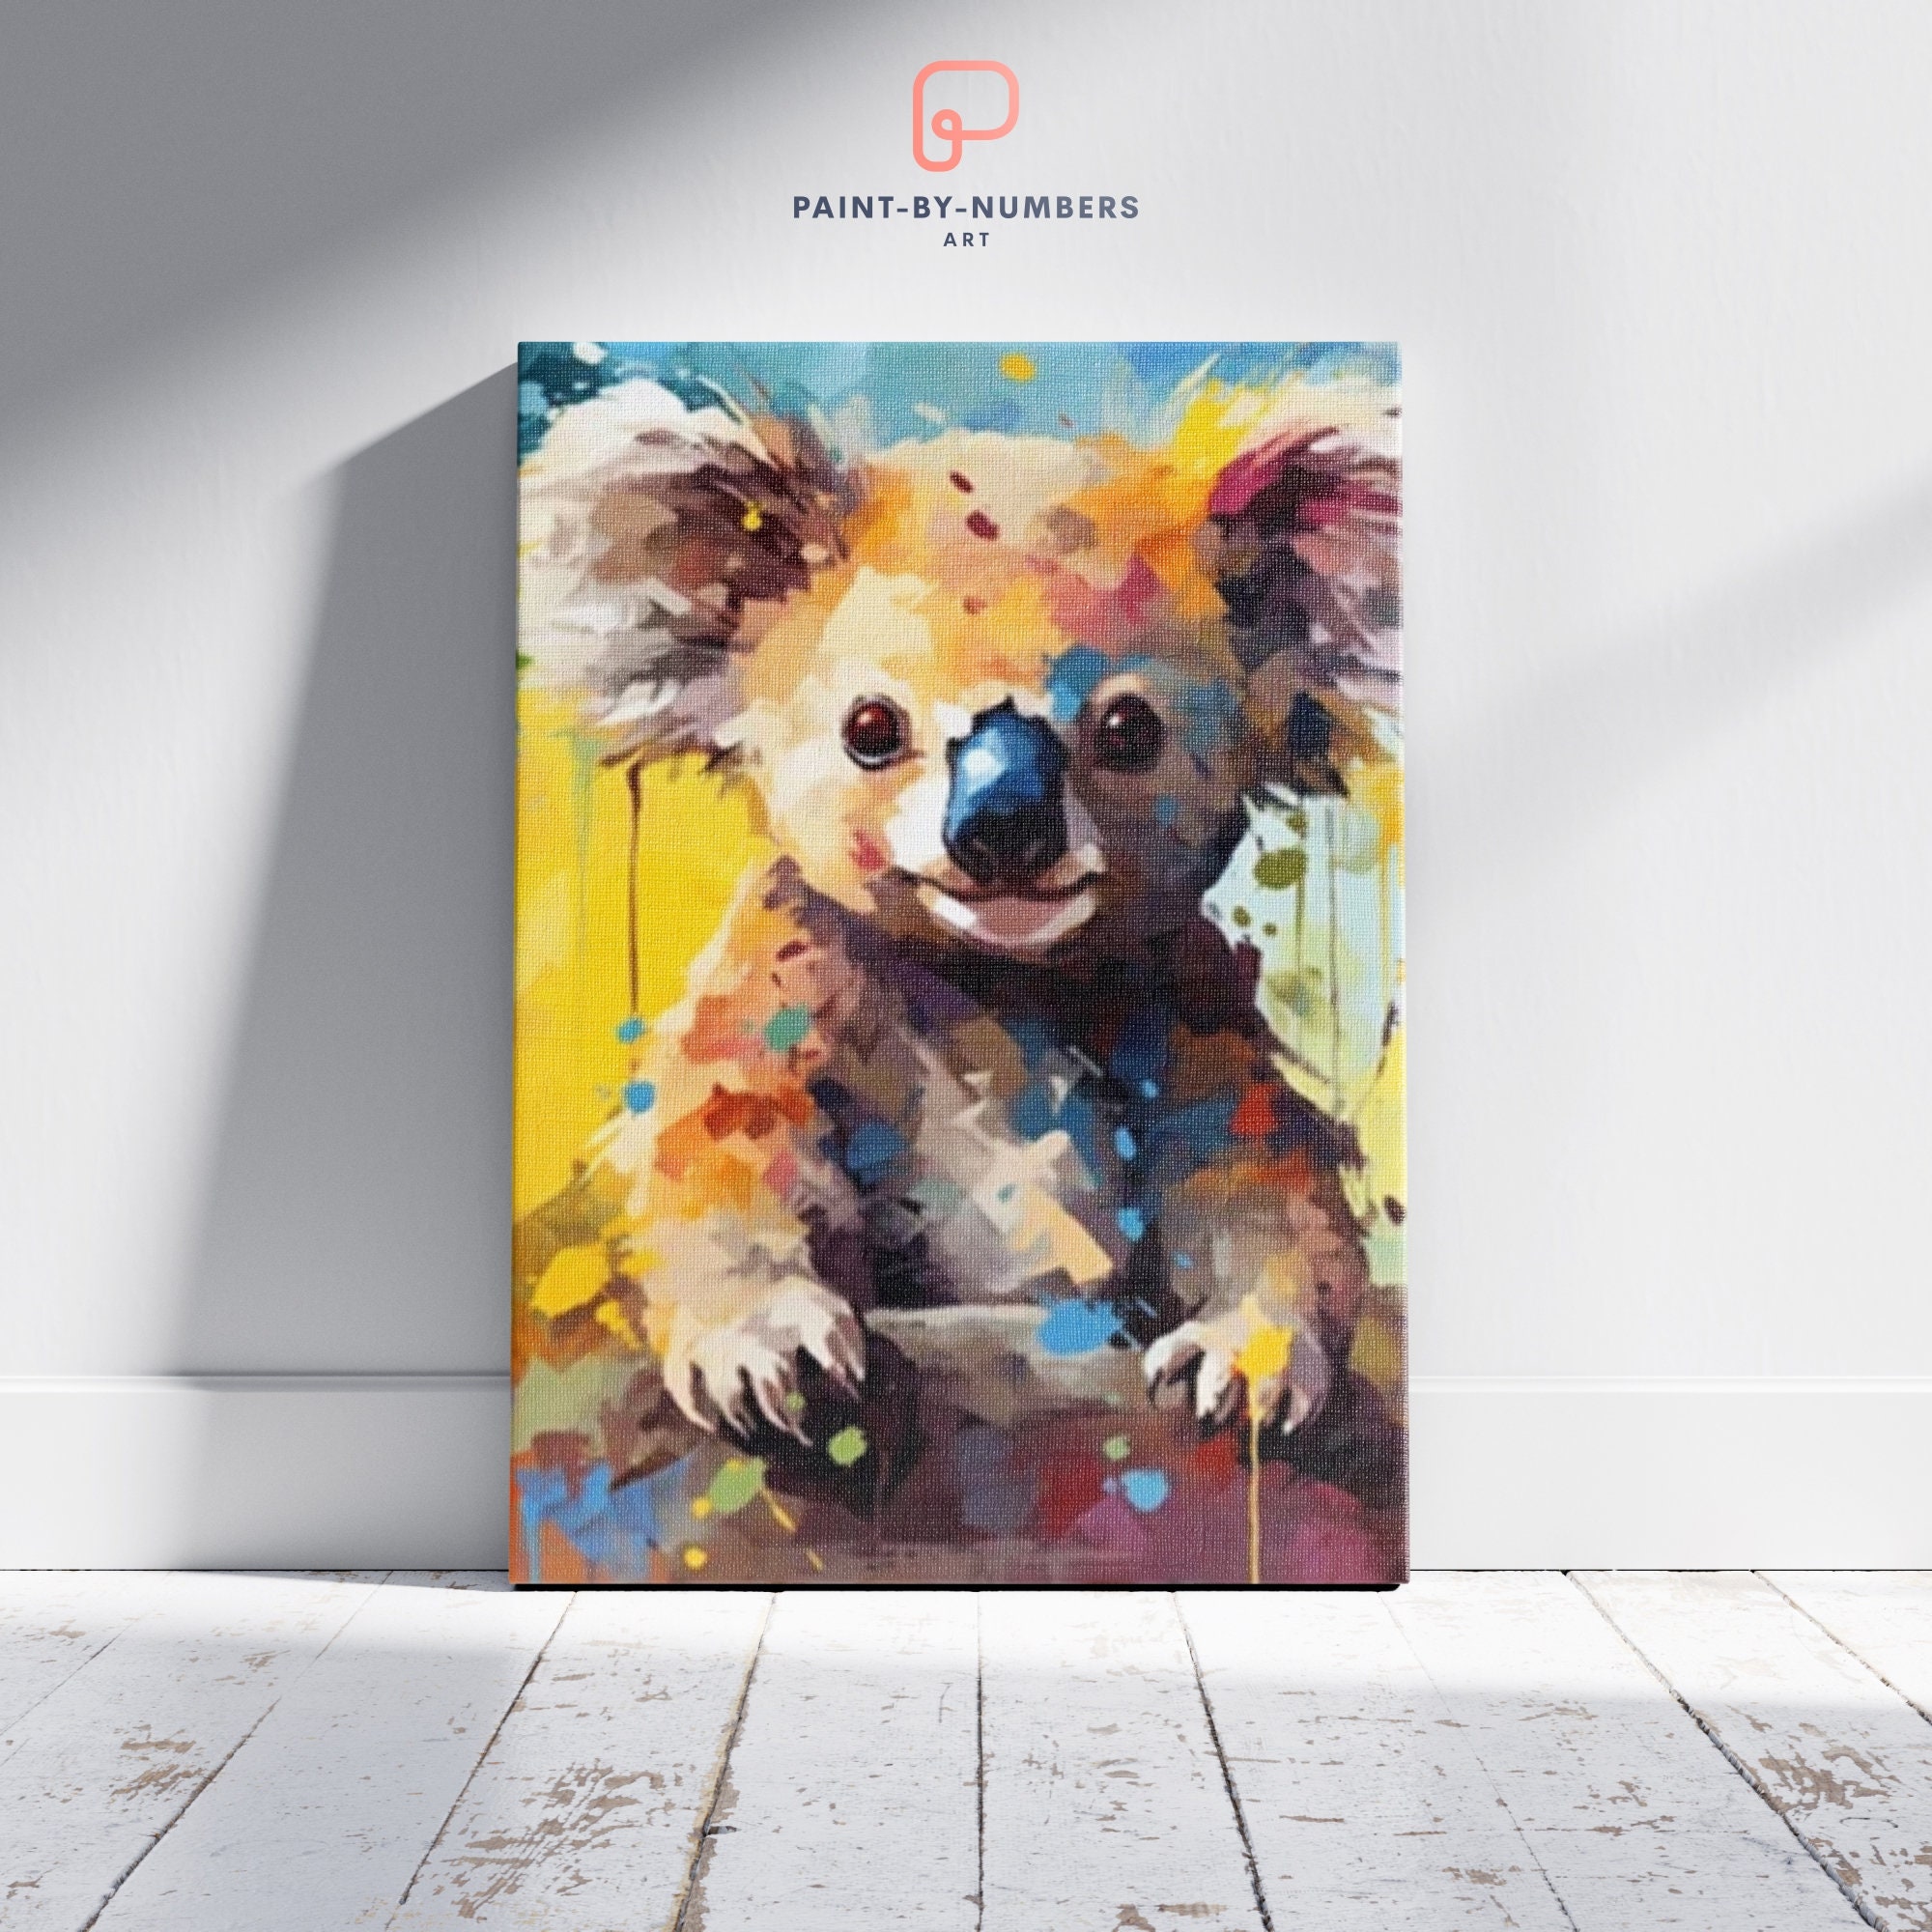 Australian colorful koala Painting | Art of Paint by Numbers